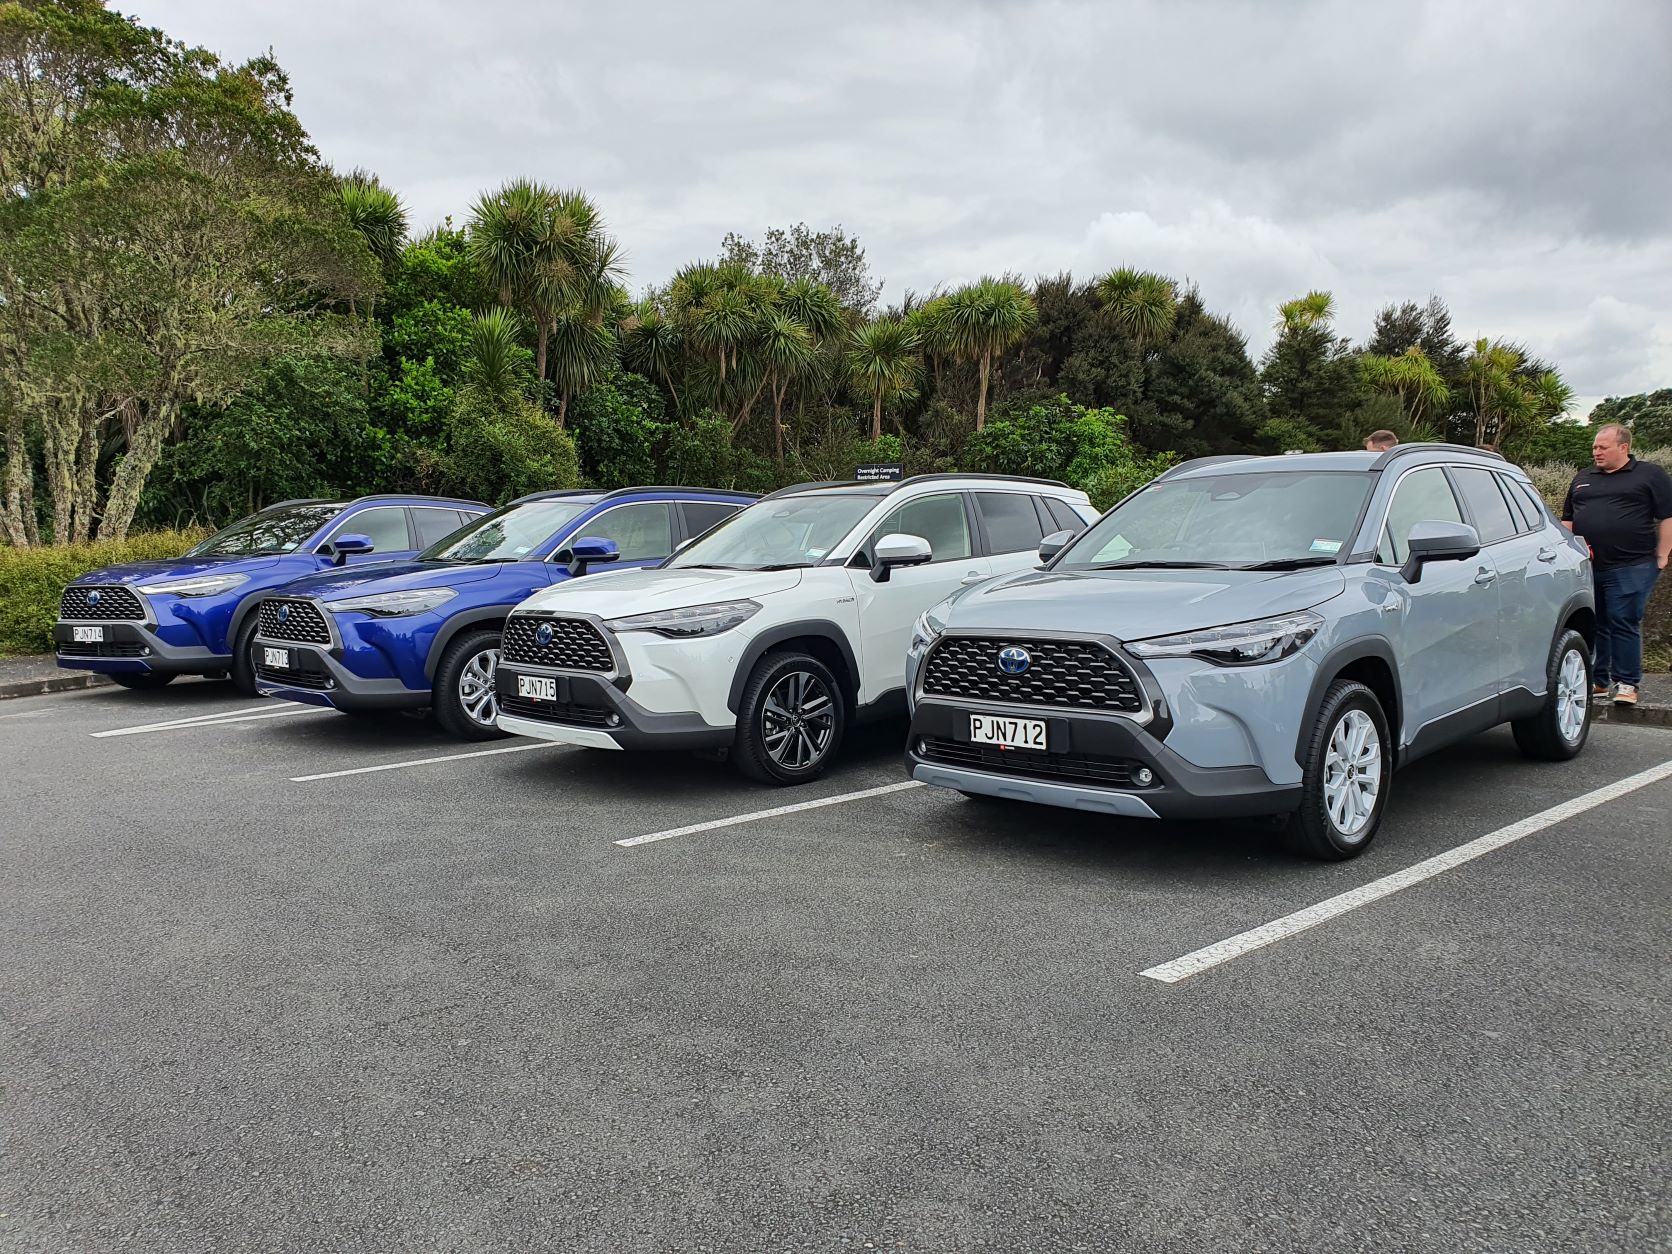 Front three quarters view of the four different Toyota Corolla Cross models. Two in blue, one in white and one in grey.